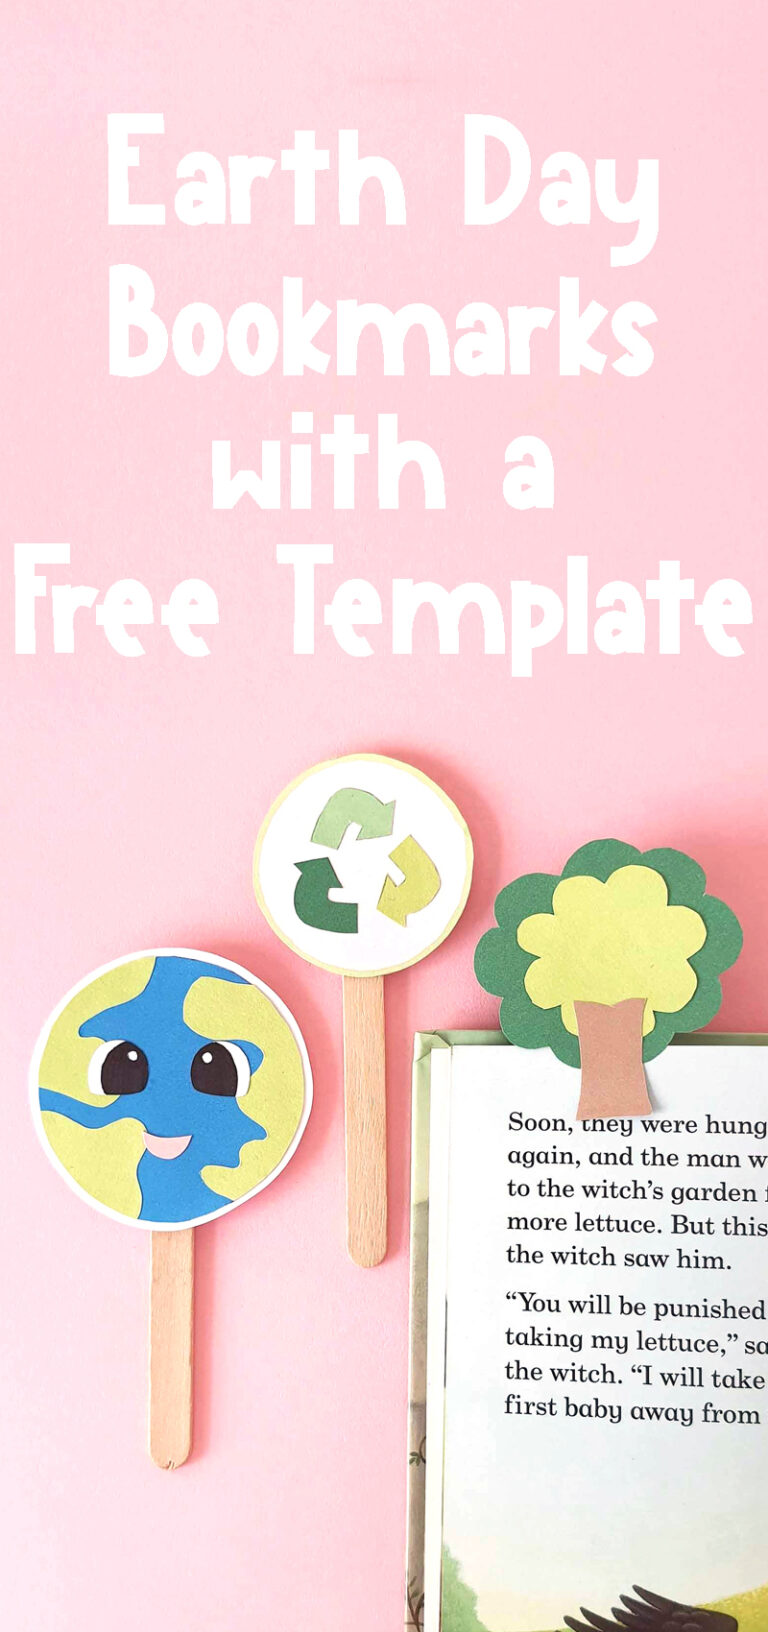 celebrate-earth-day-with-these-free-printable-bookmarks-for-kids